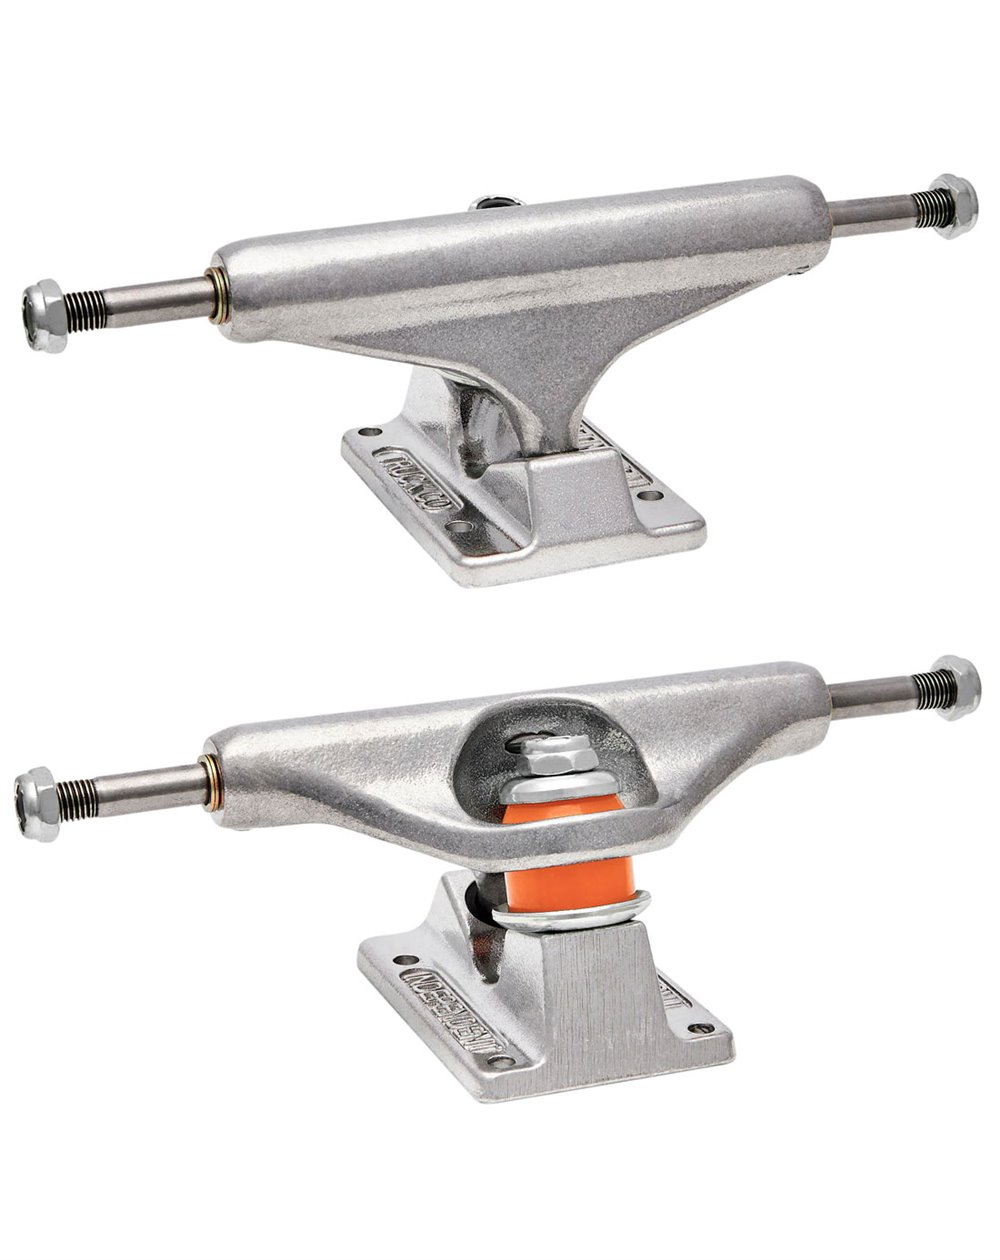 Independent Stage XI Standard 129mm Skateboard Trucks pack of 2